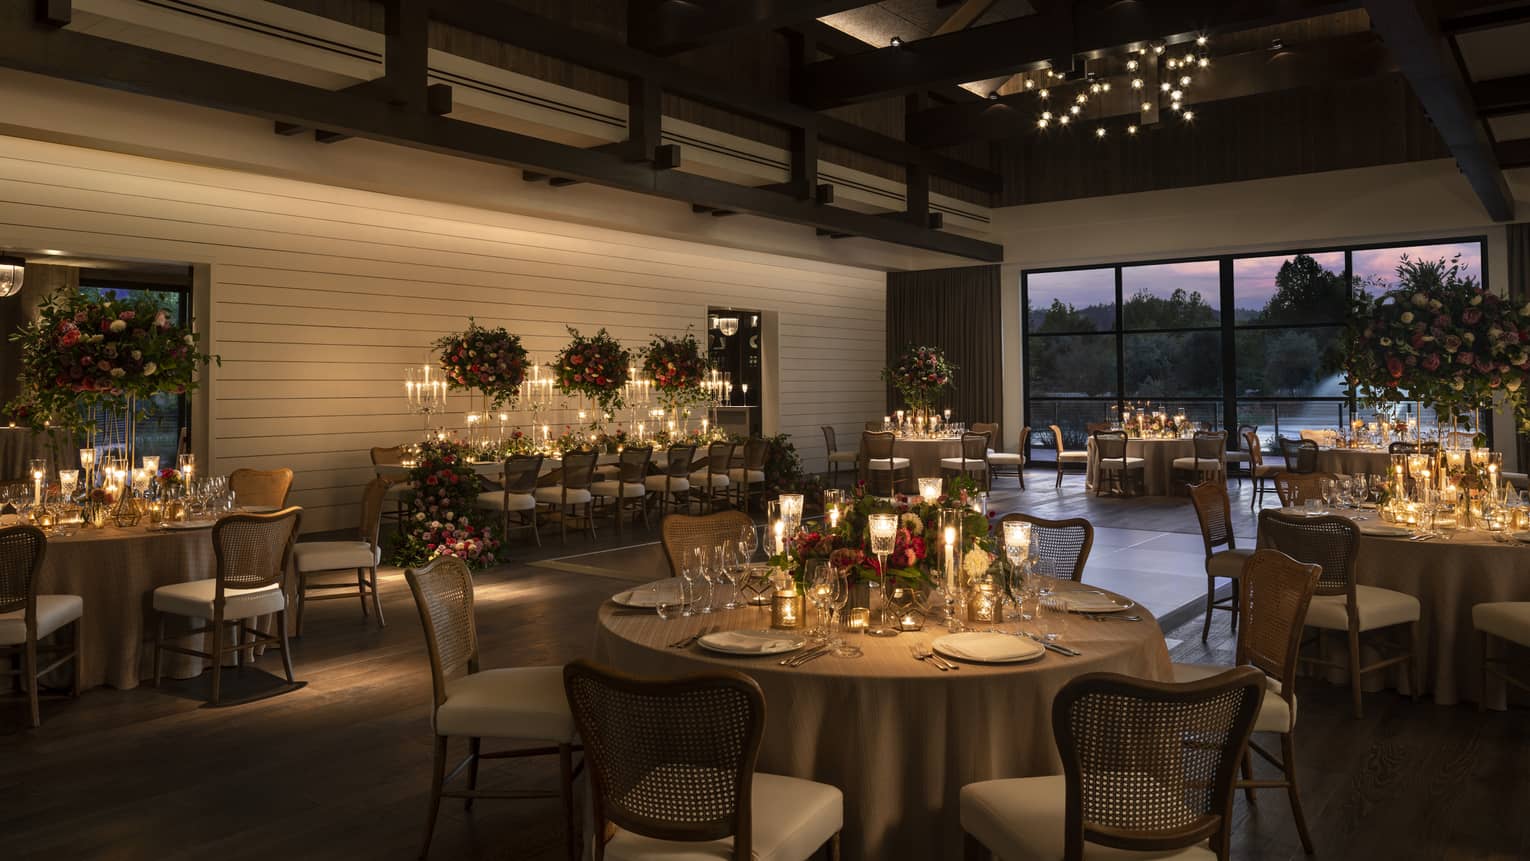 Banquet tables set for wedding in dimly lit barn